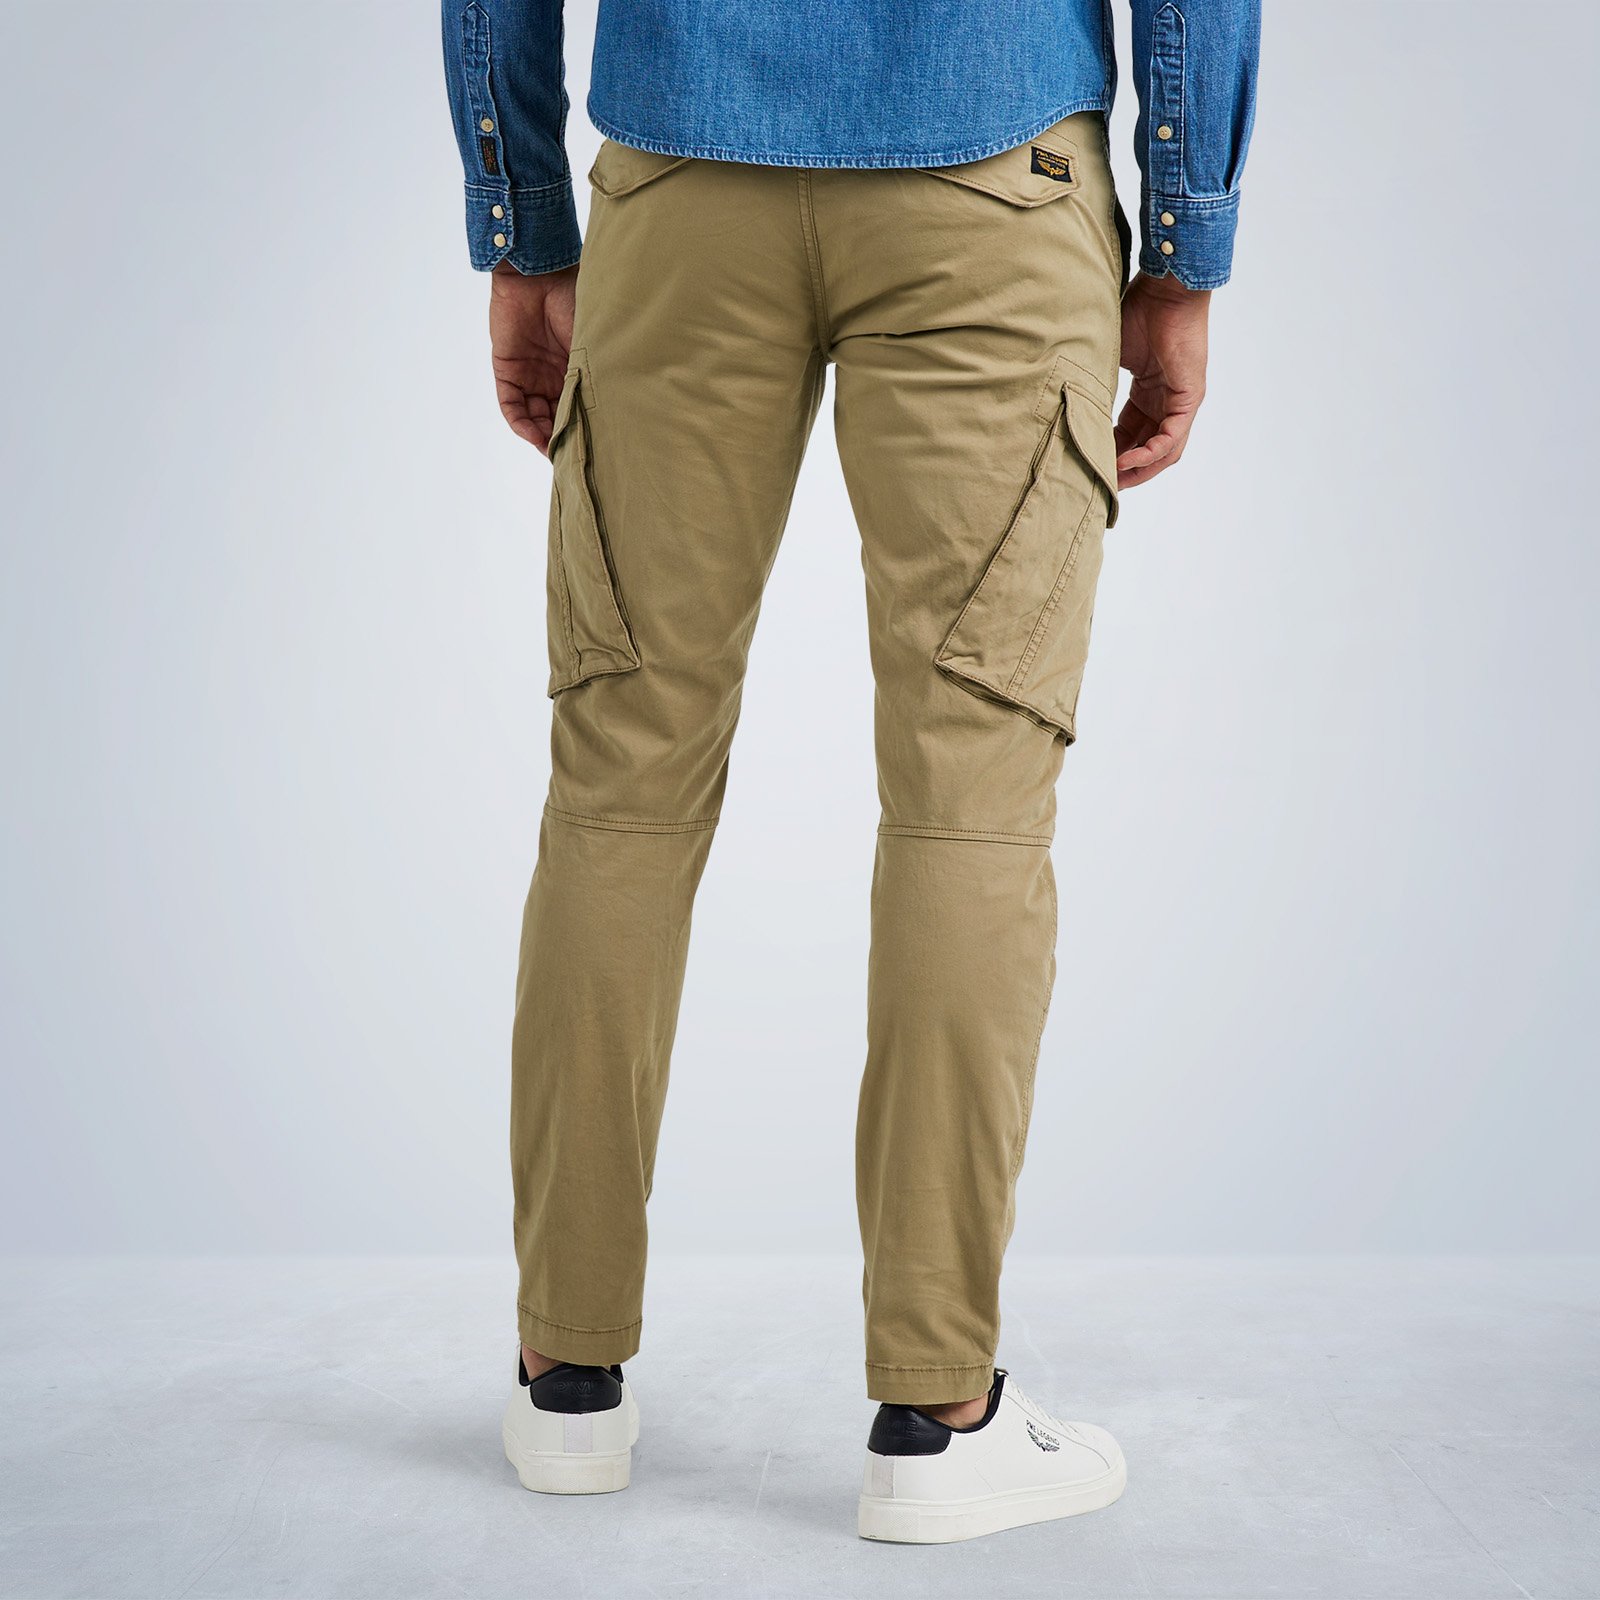 PME LEGEND Pants delivery Nordrop | Cargo | Free